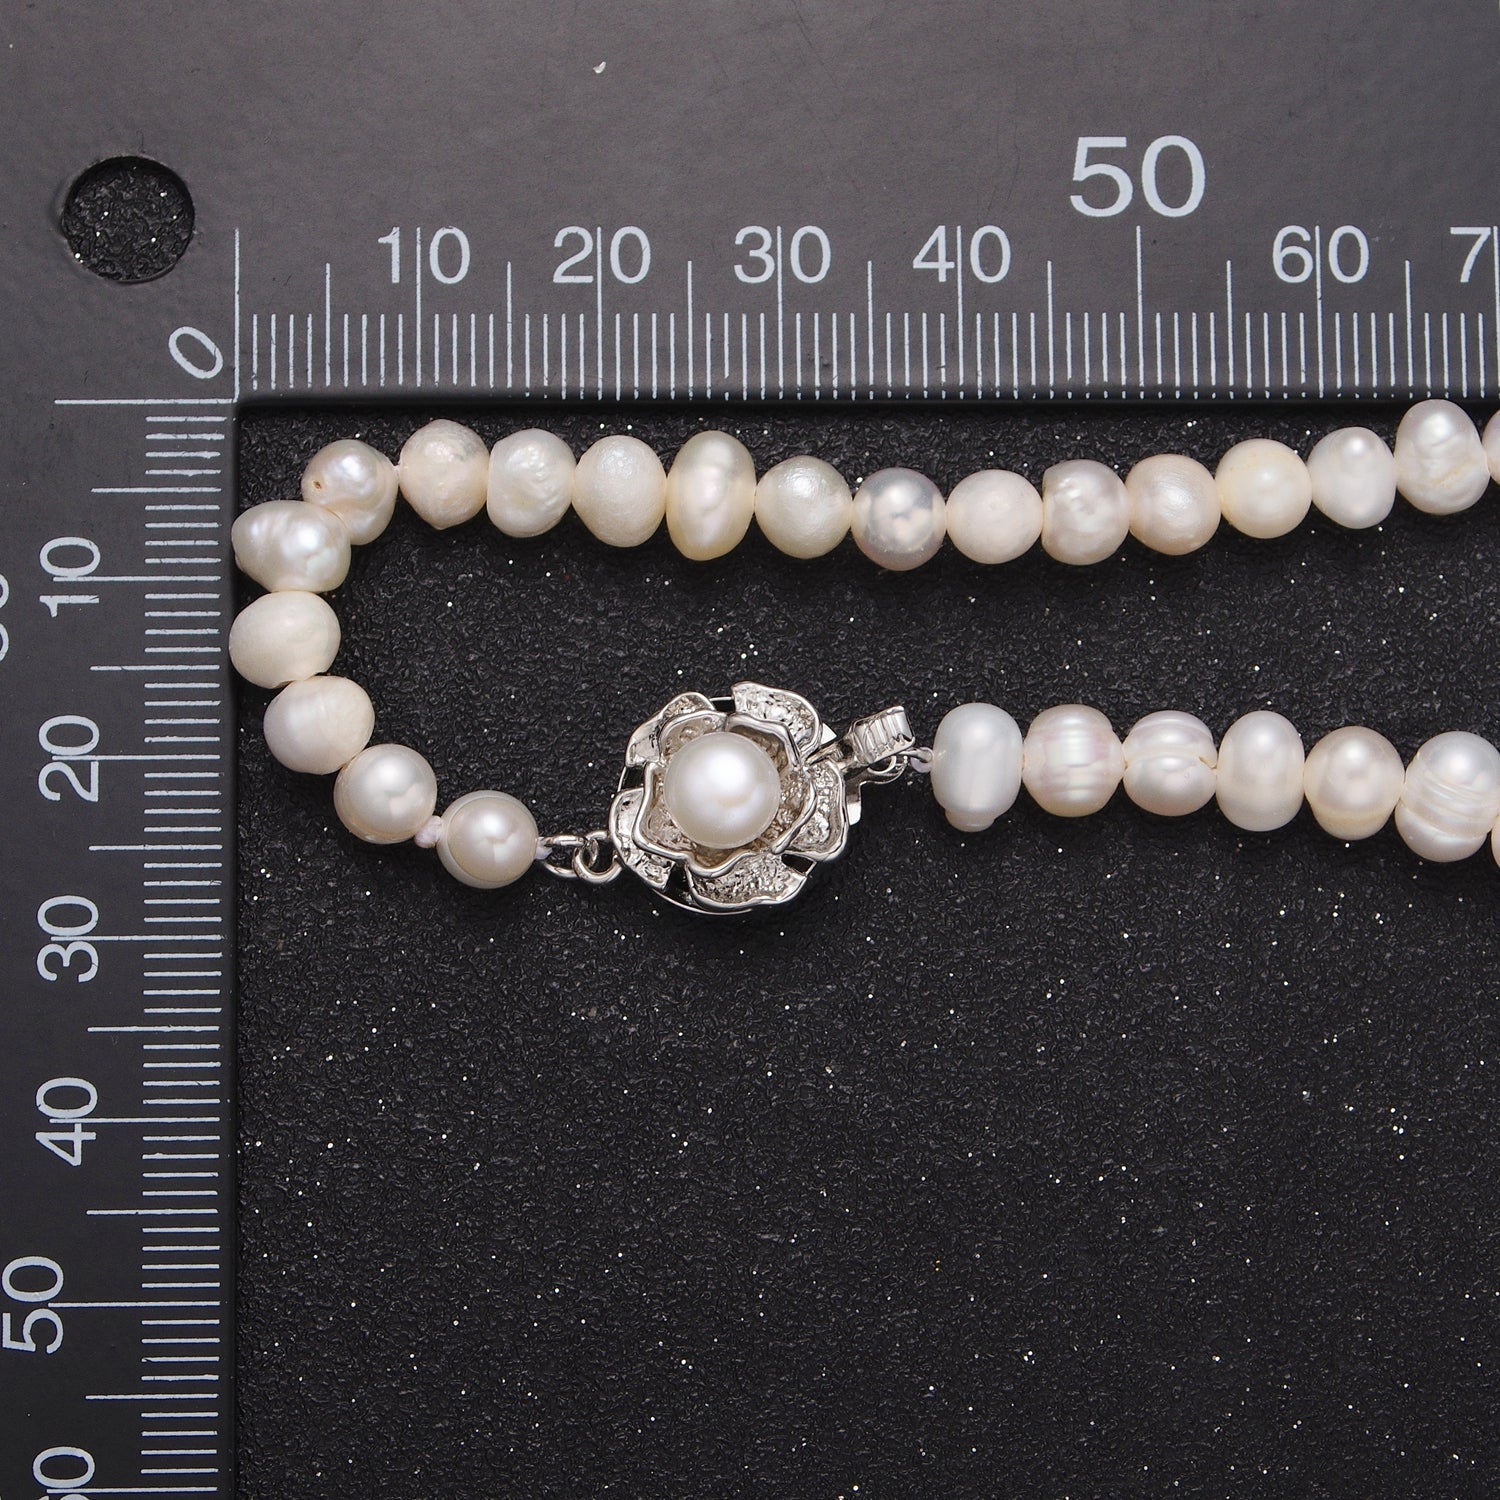 White Gold Filled Silver Flower Statement Freshwater Pearl 16.5 Inch Choker Necklace | WA-1181 - DLUXCA